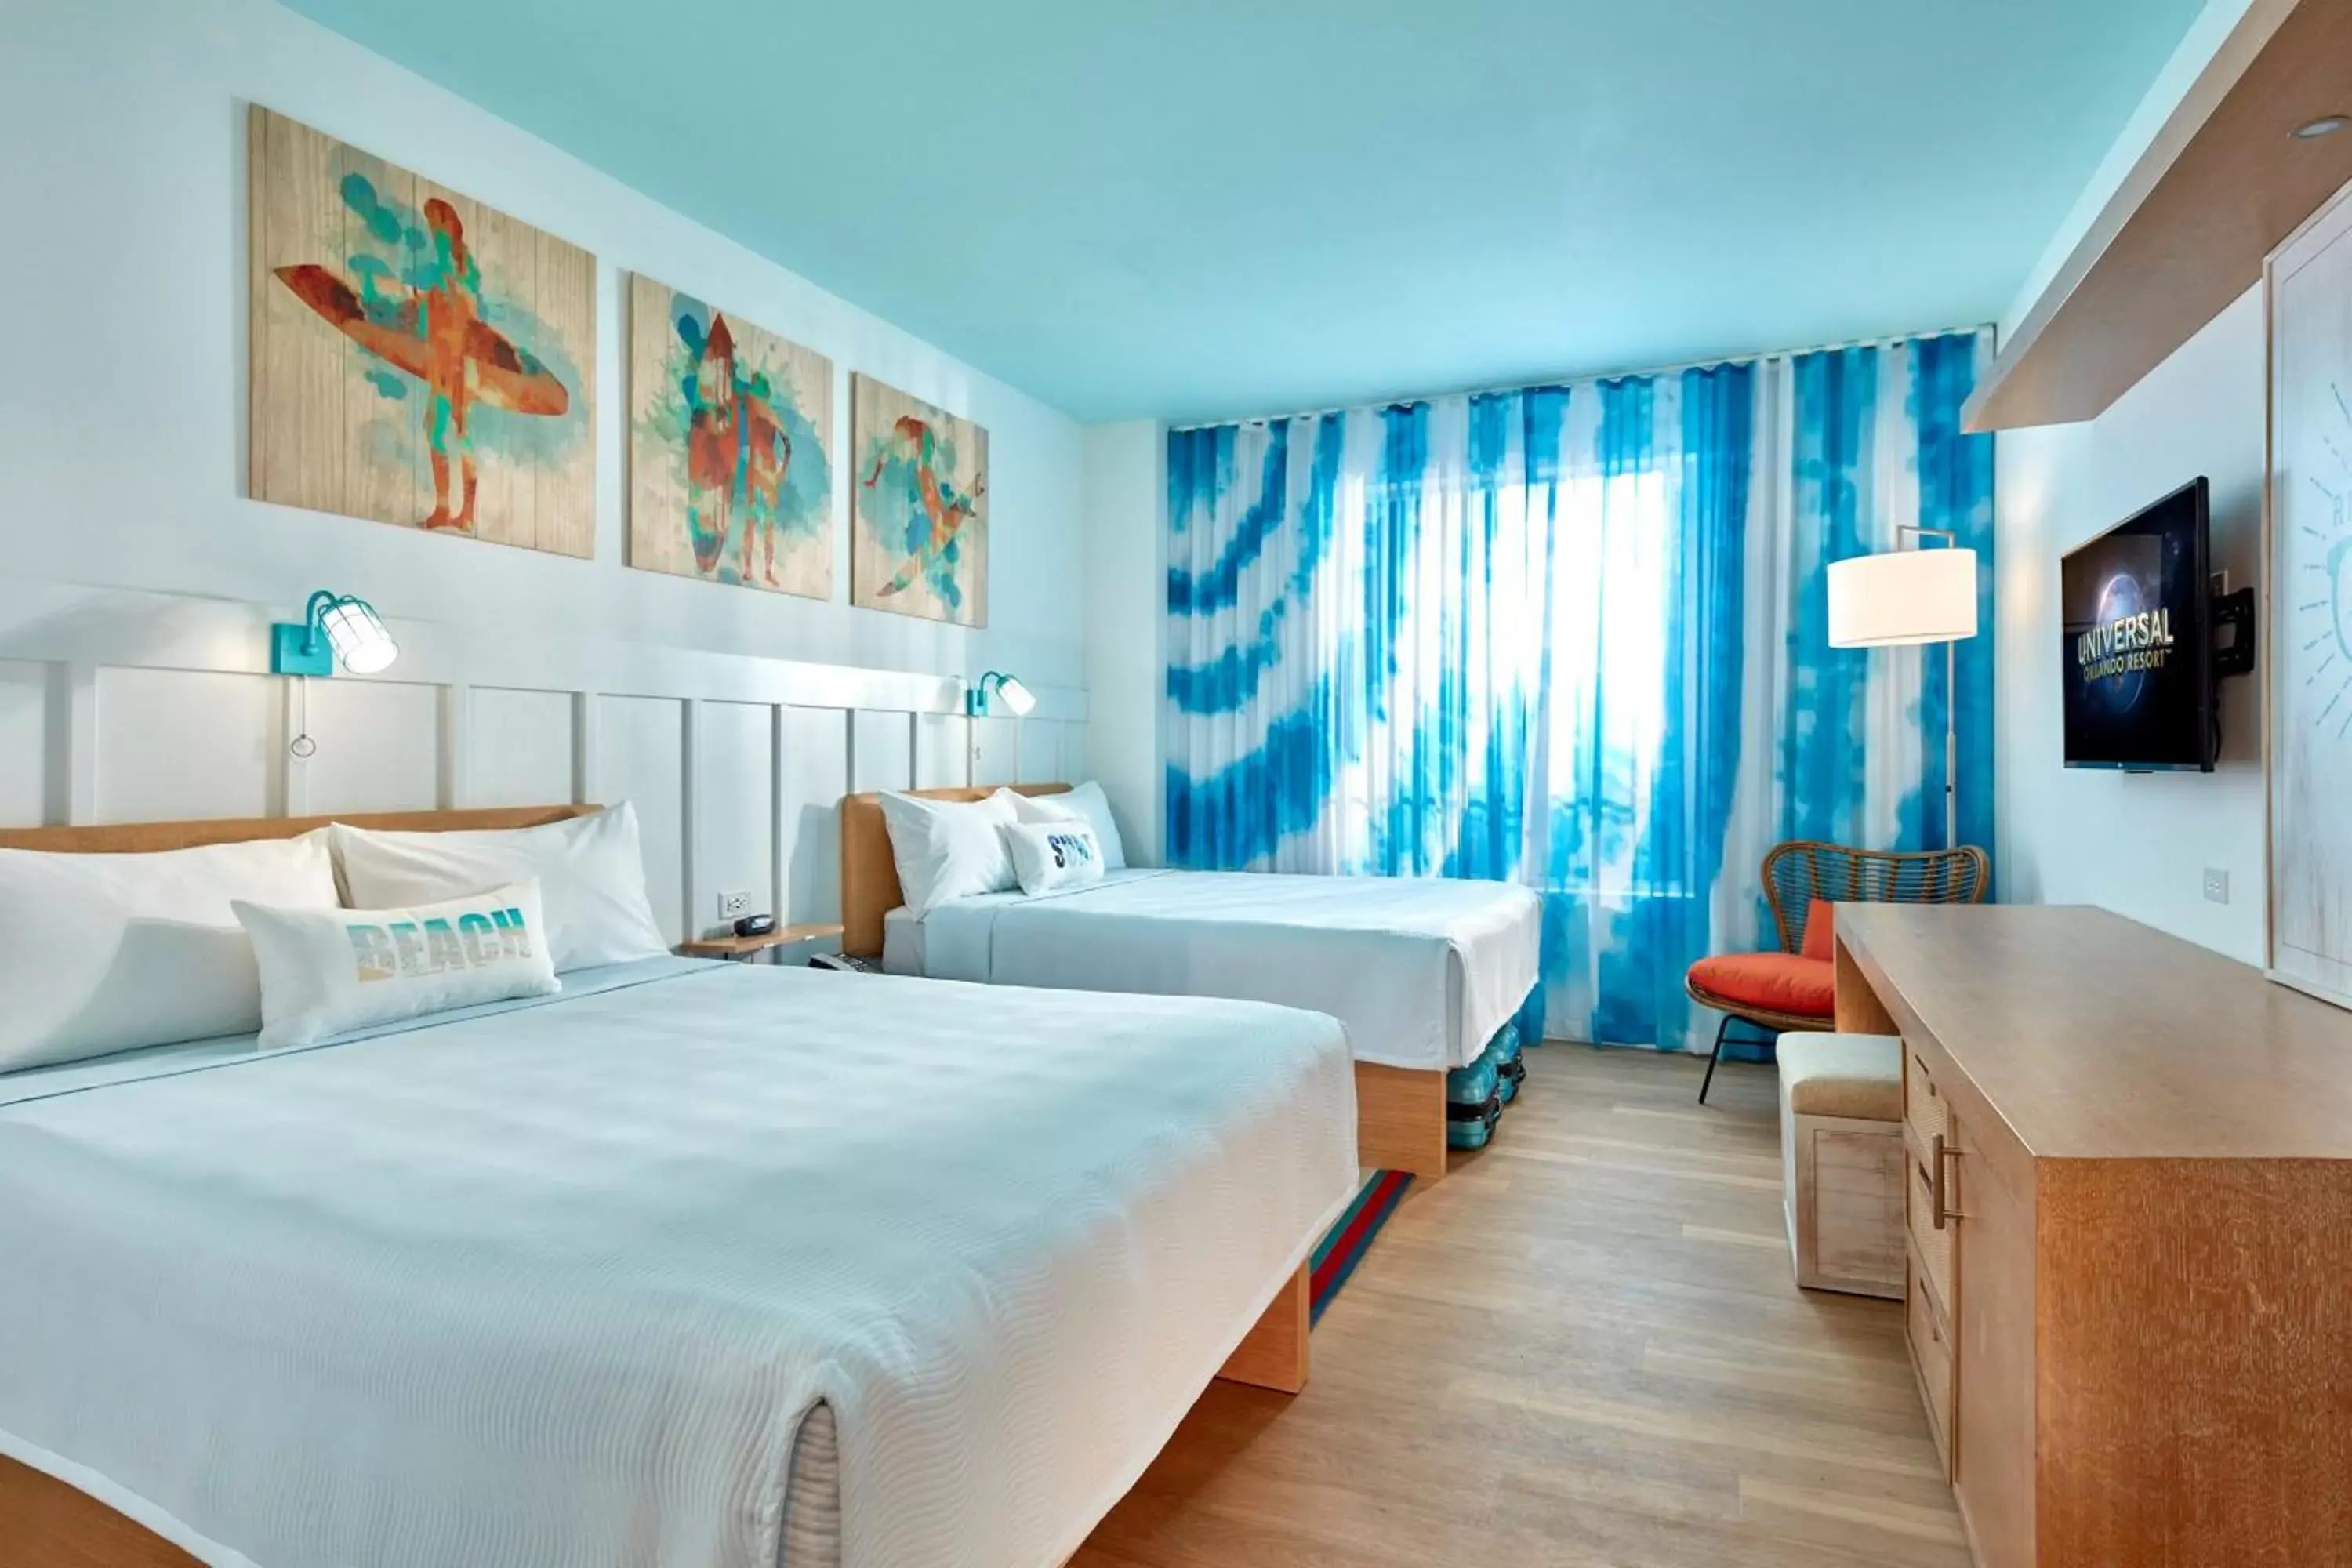 Standard 2 Queen Room (Includes Early Park Admission*) in Universal's Endless Summer Resort - Surfside Inn and Suites